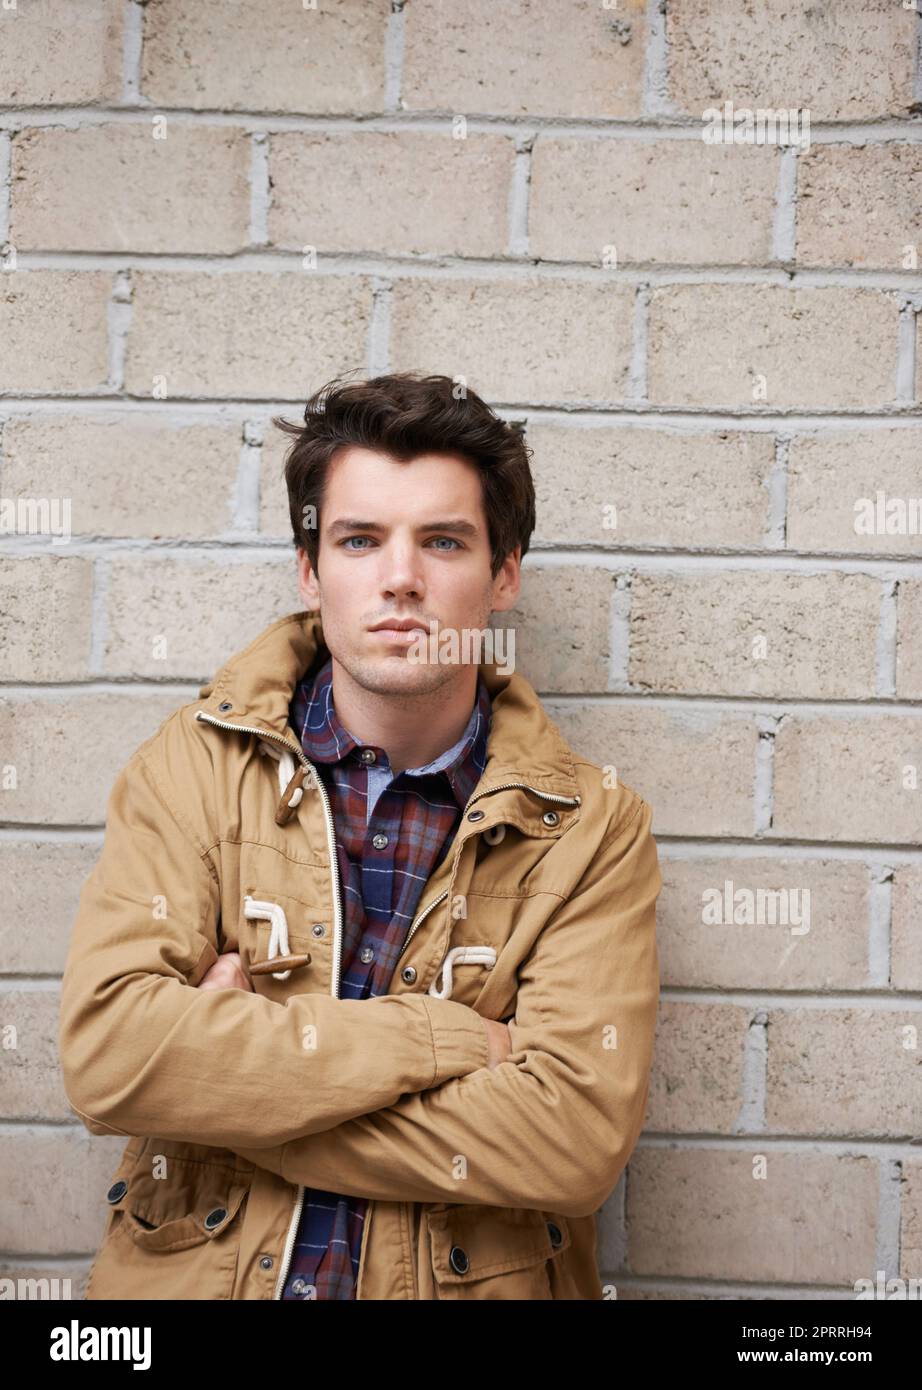 Hes got a red hot attitude to keep him warm. a handsome young man standing against a brick wall with his arms crossed. Stock Photo